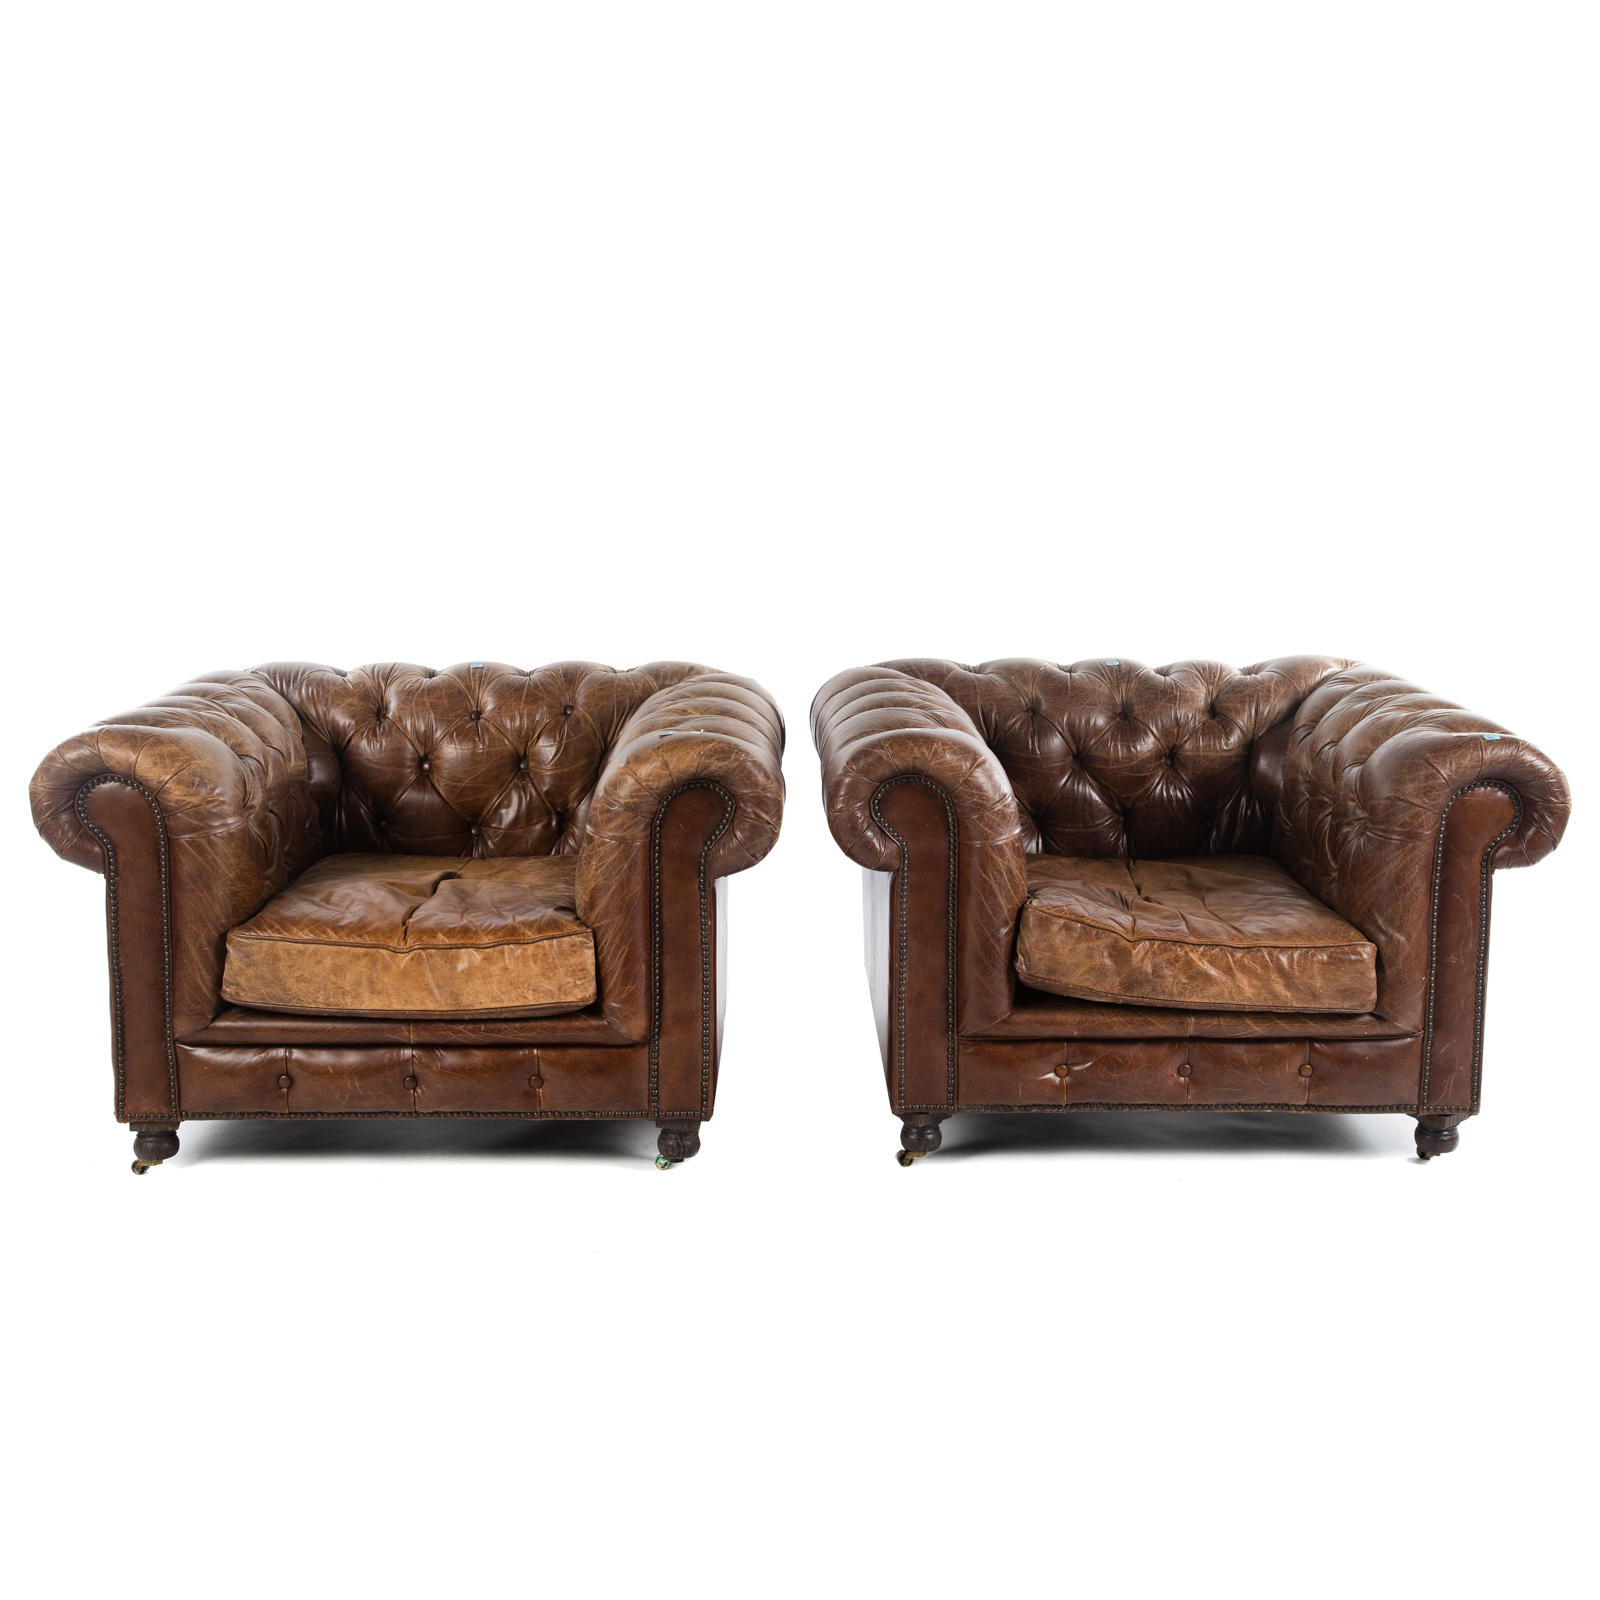 A PAIR OF RESTORATION HARDWARE